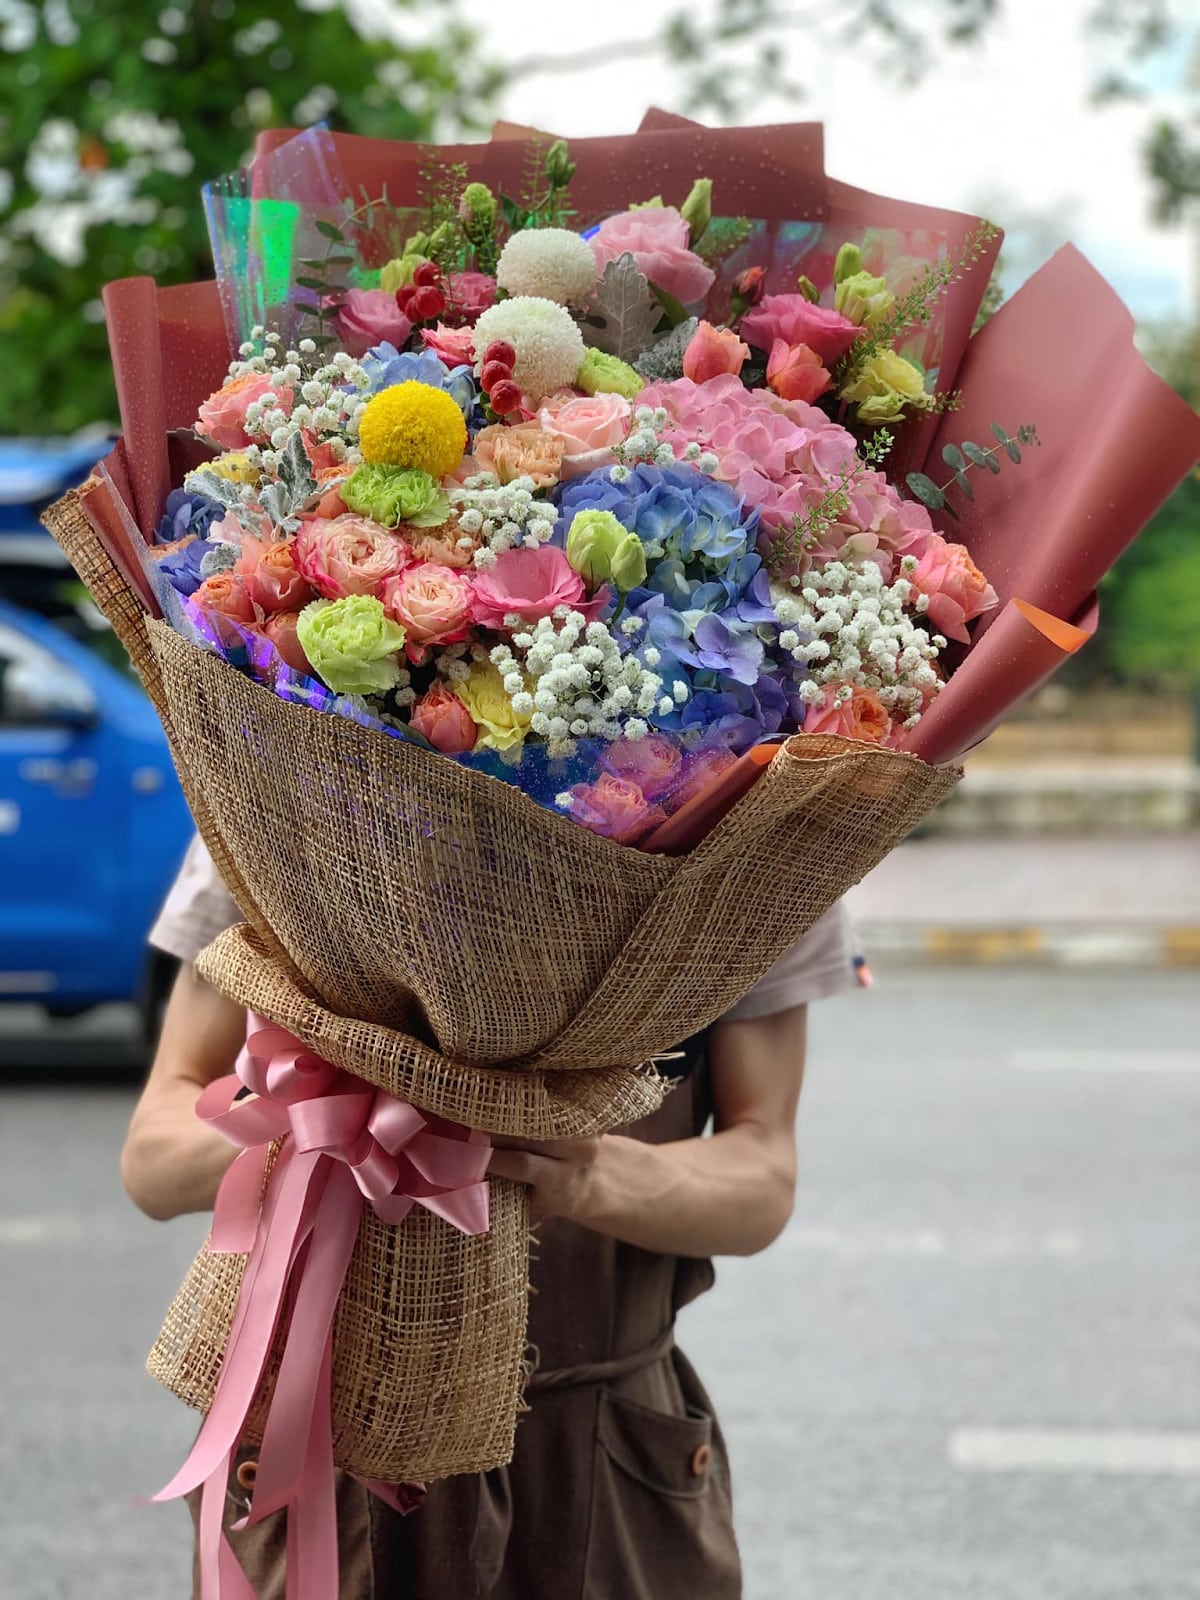 The Koset Flower Shop in Chiang Mai